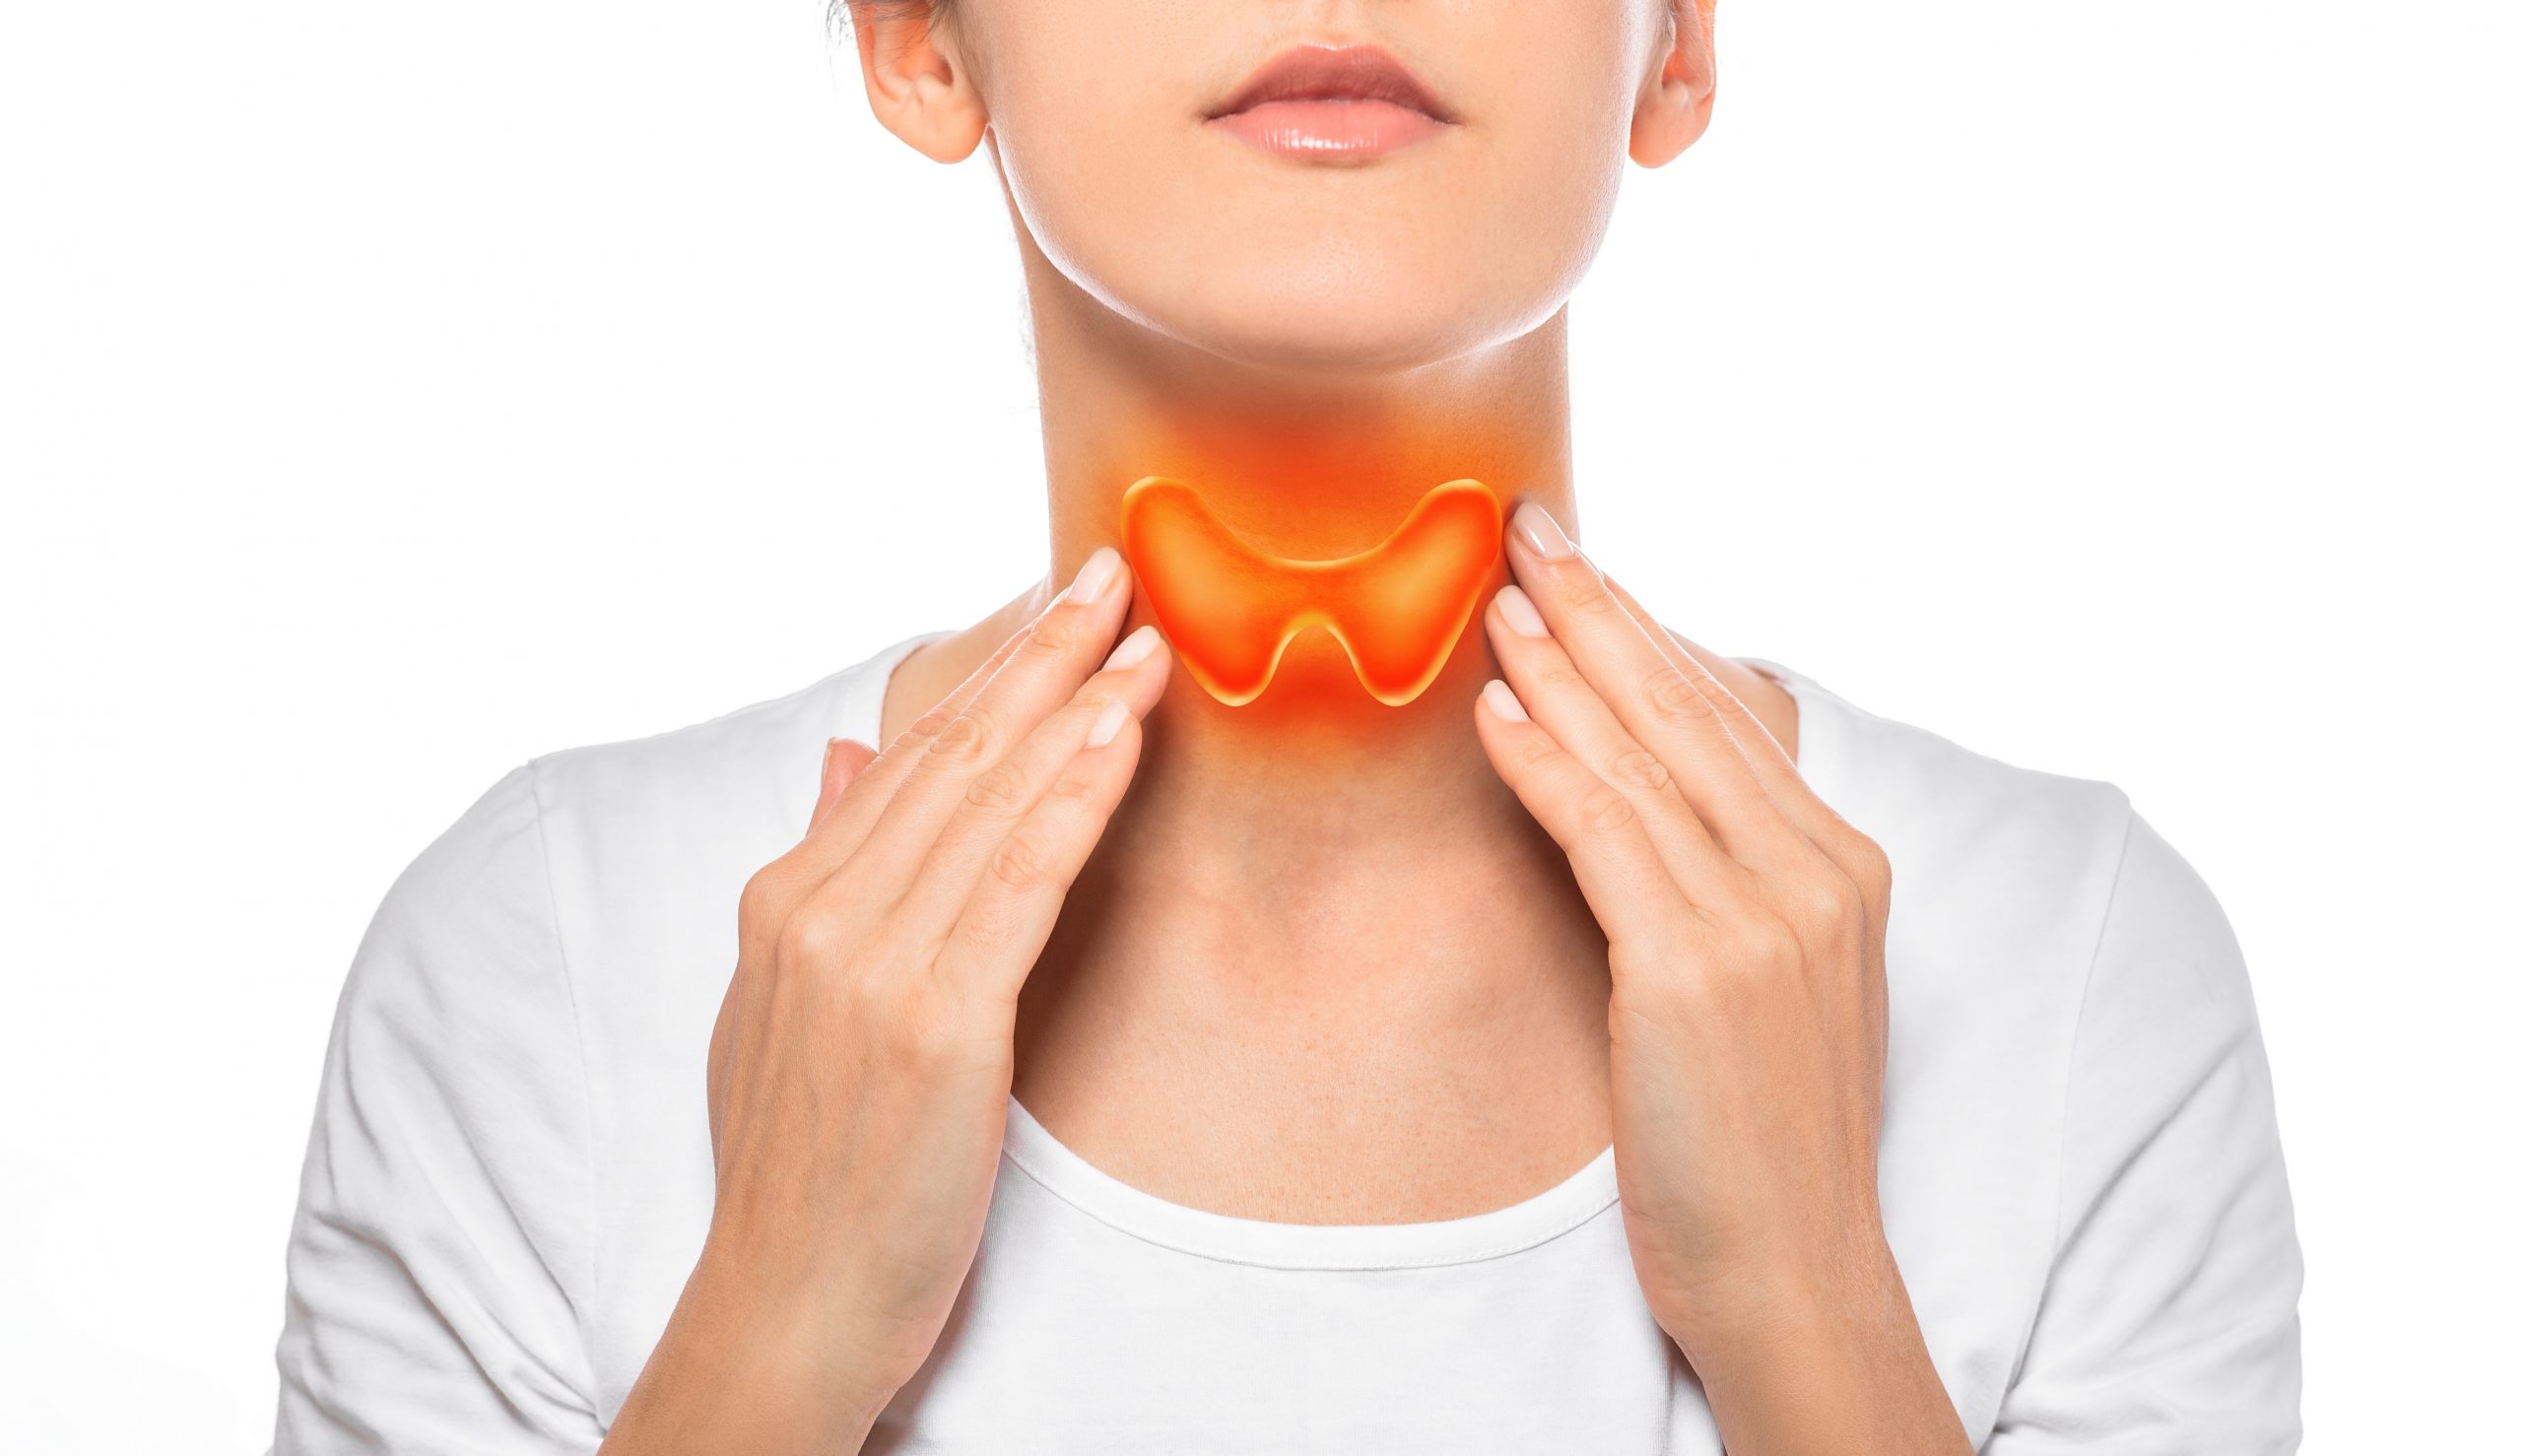 Enlarged Thyroid Surgery at City Hospital, Kalamboli: A Safe and Effective Solution